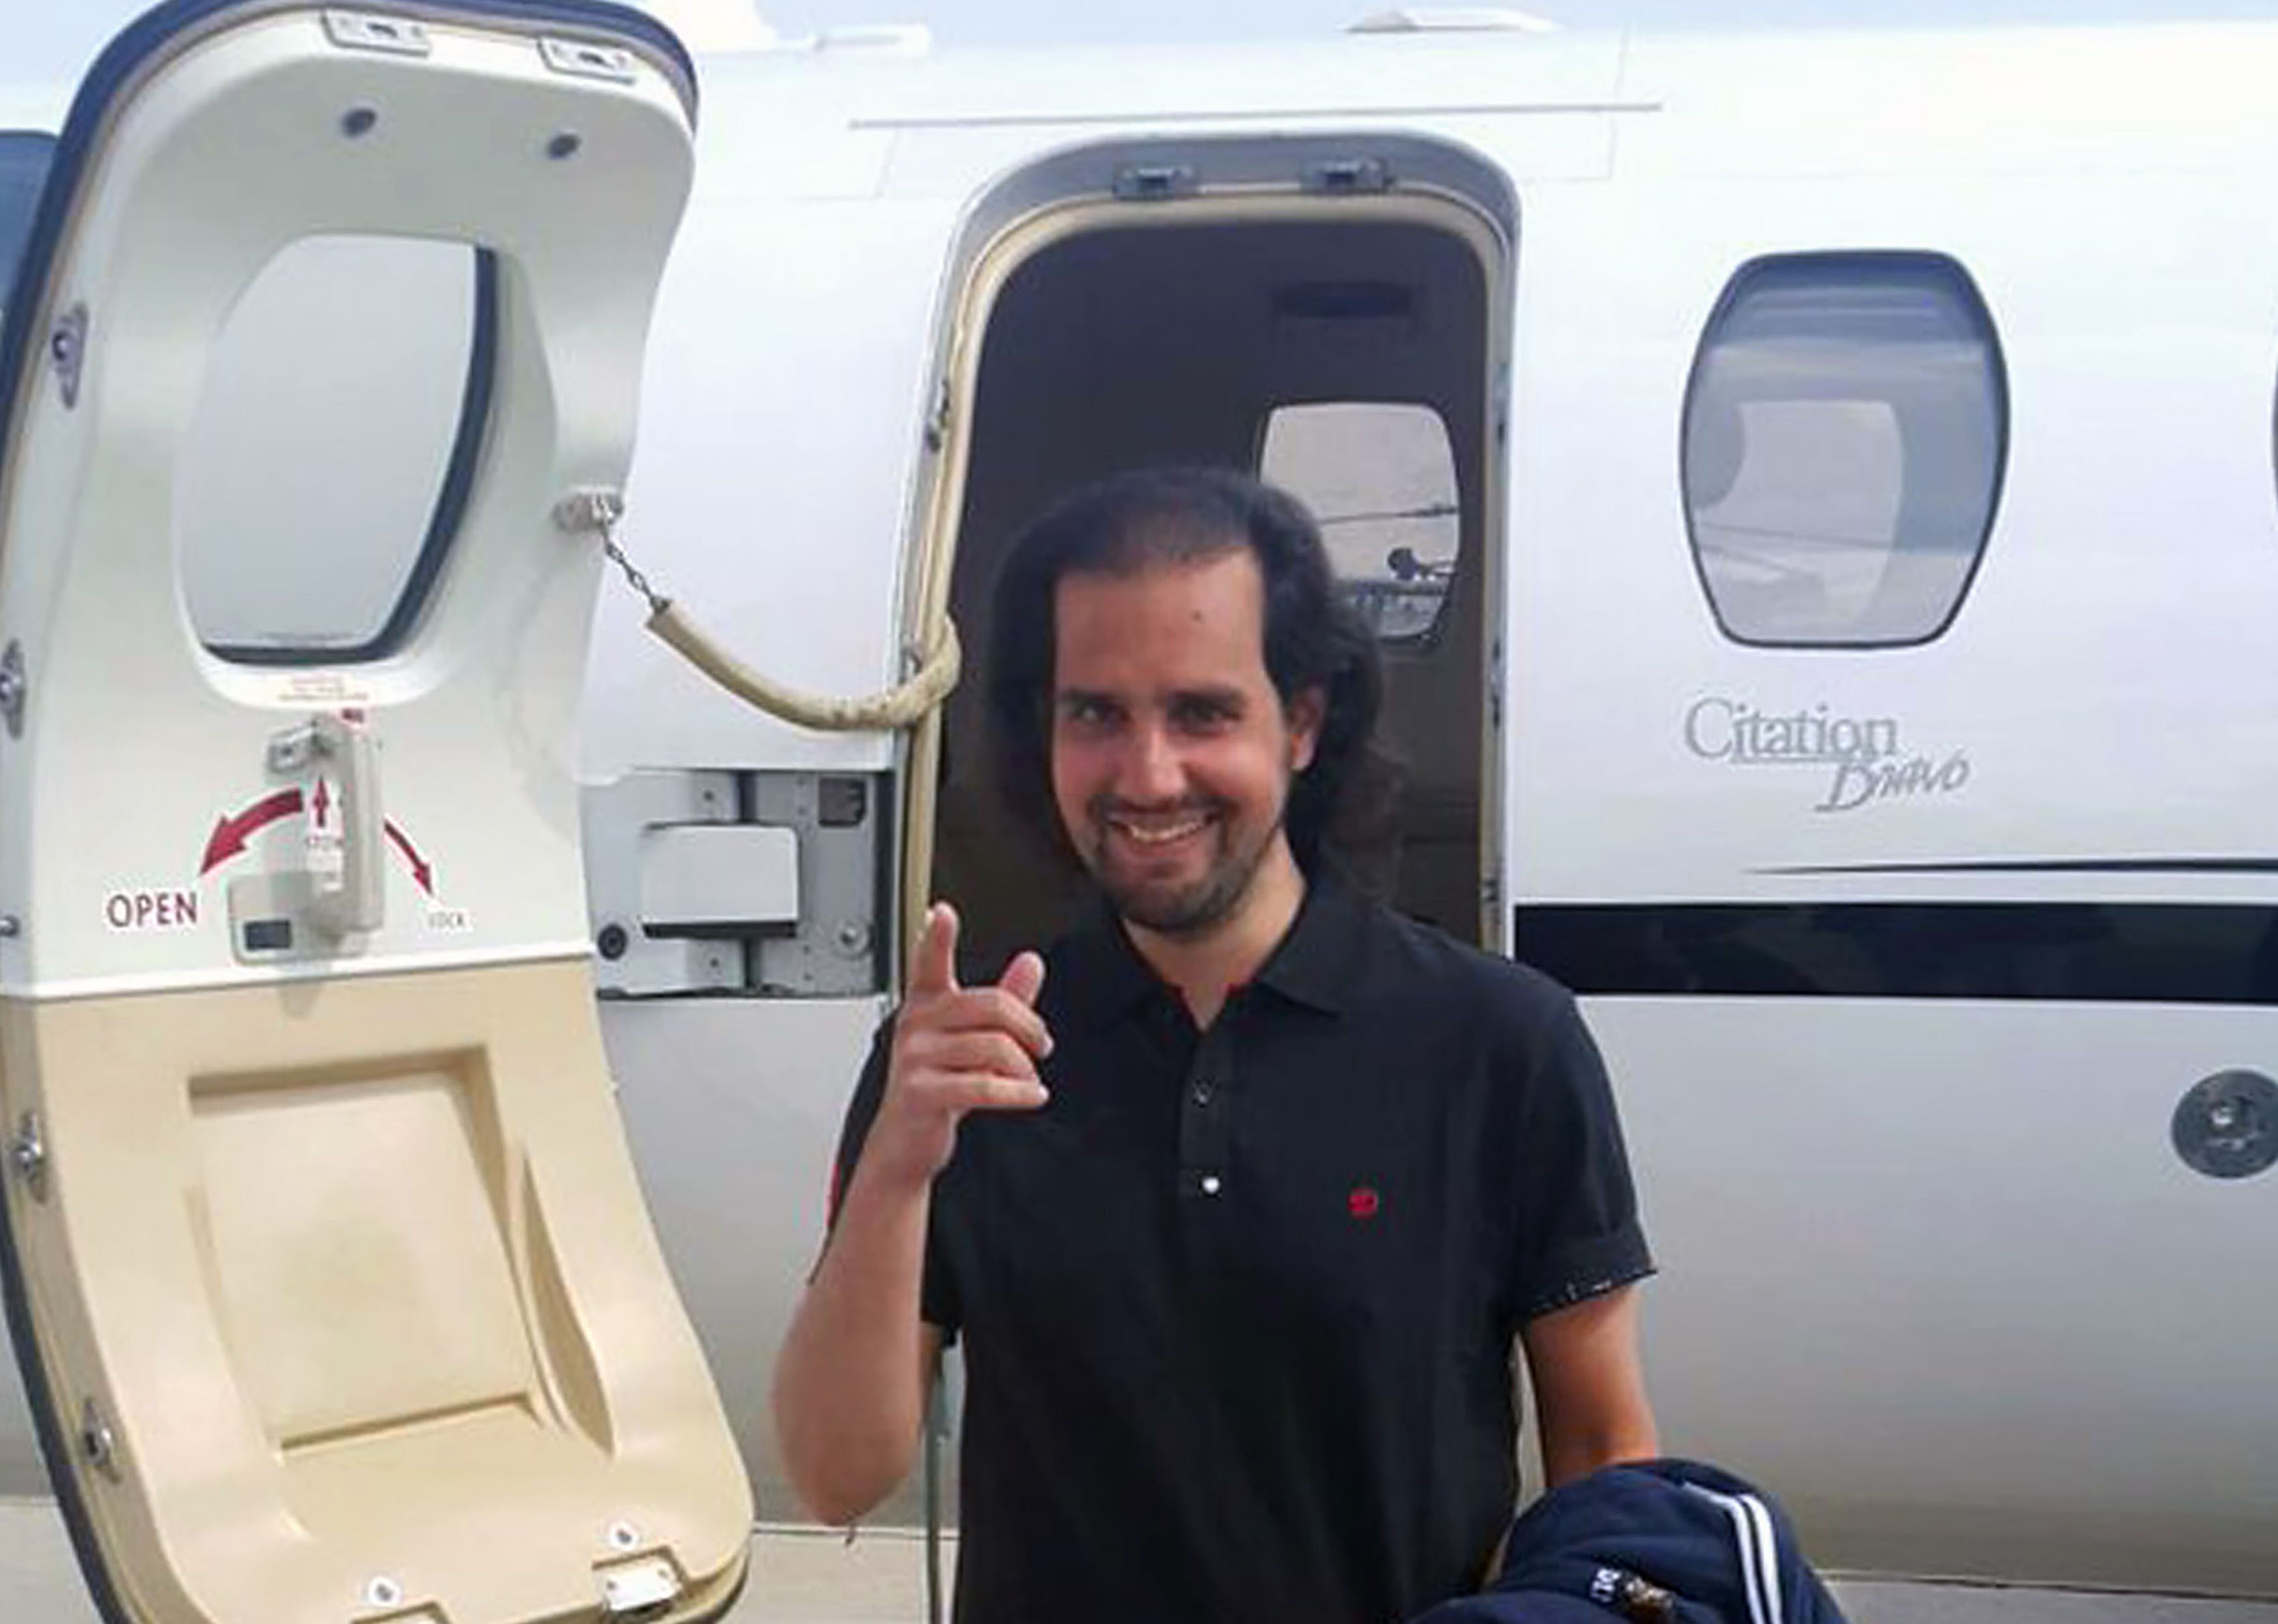 Shahbaz Taseer reunited with family after rescue